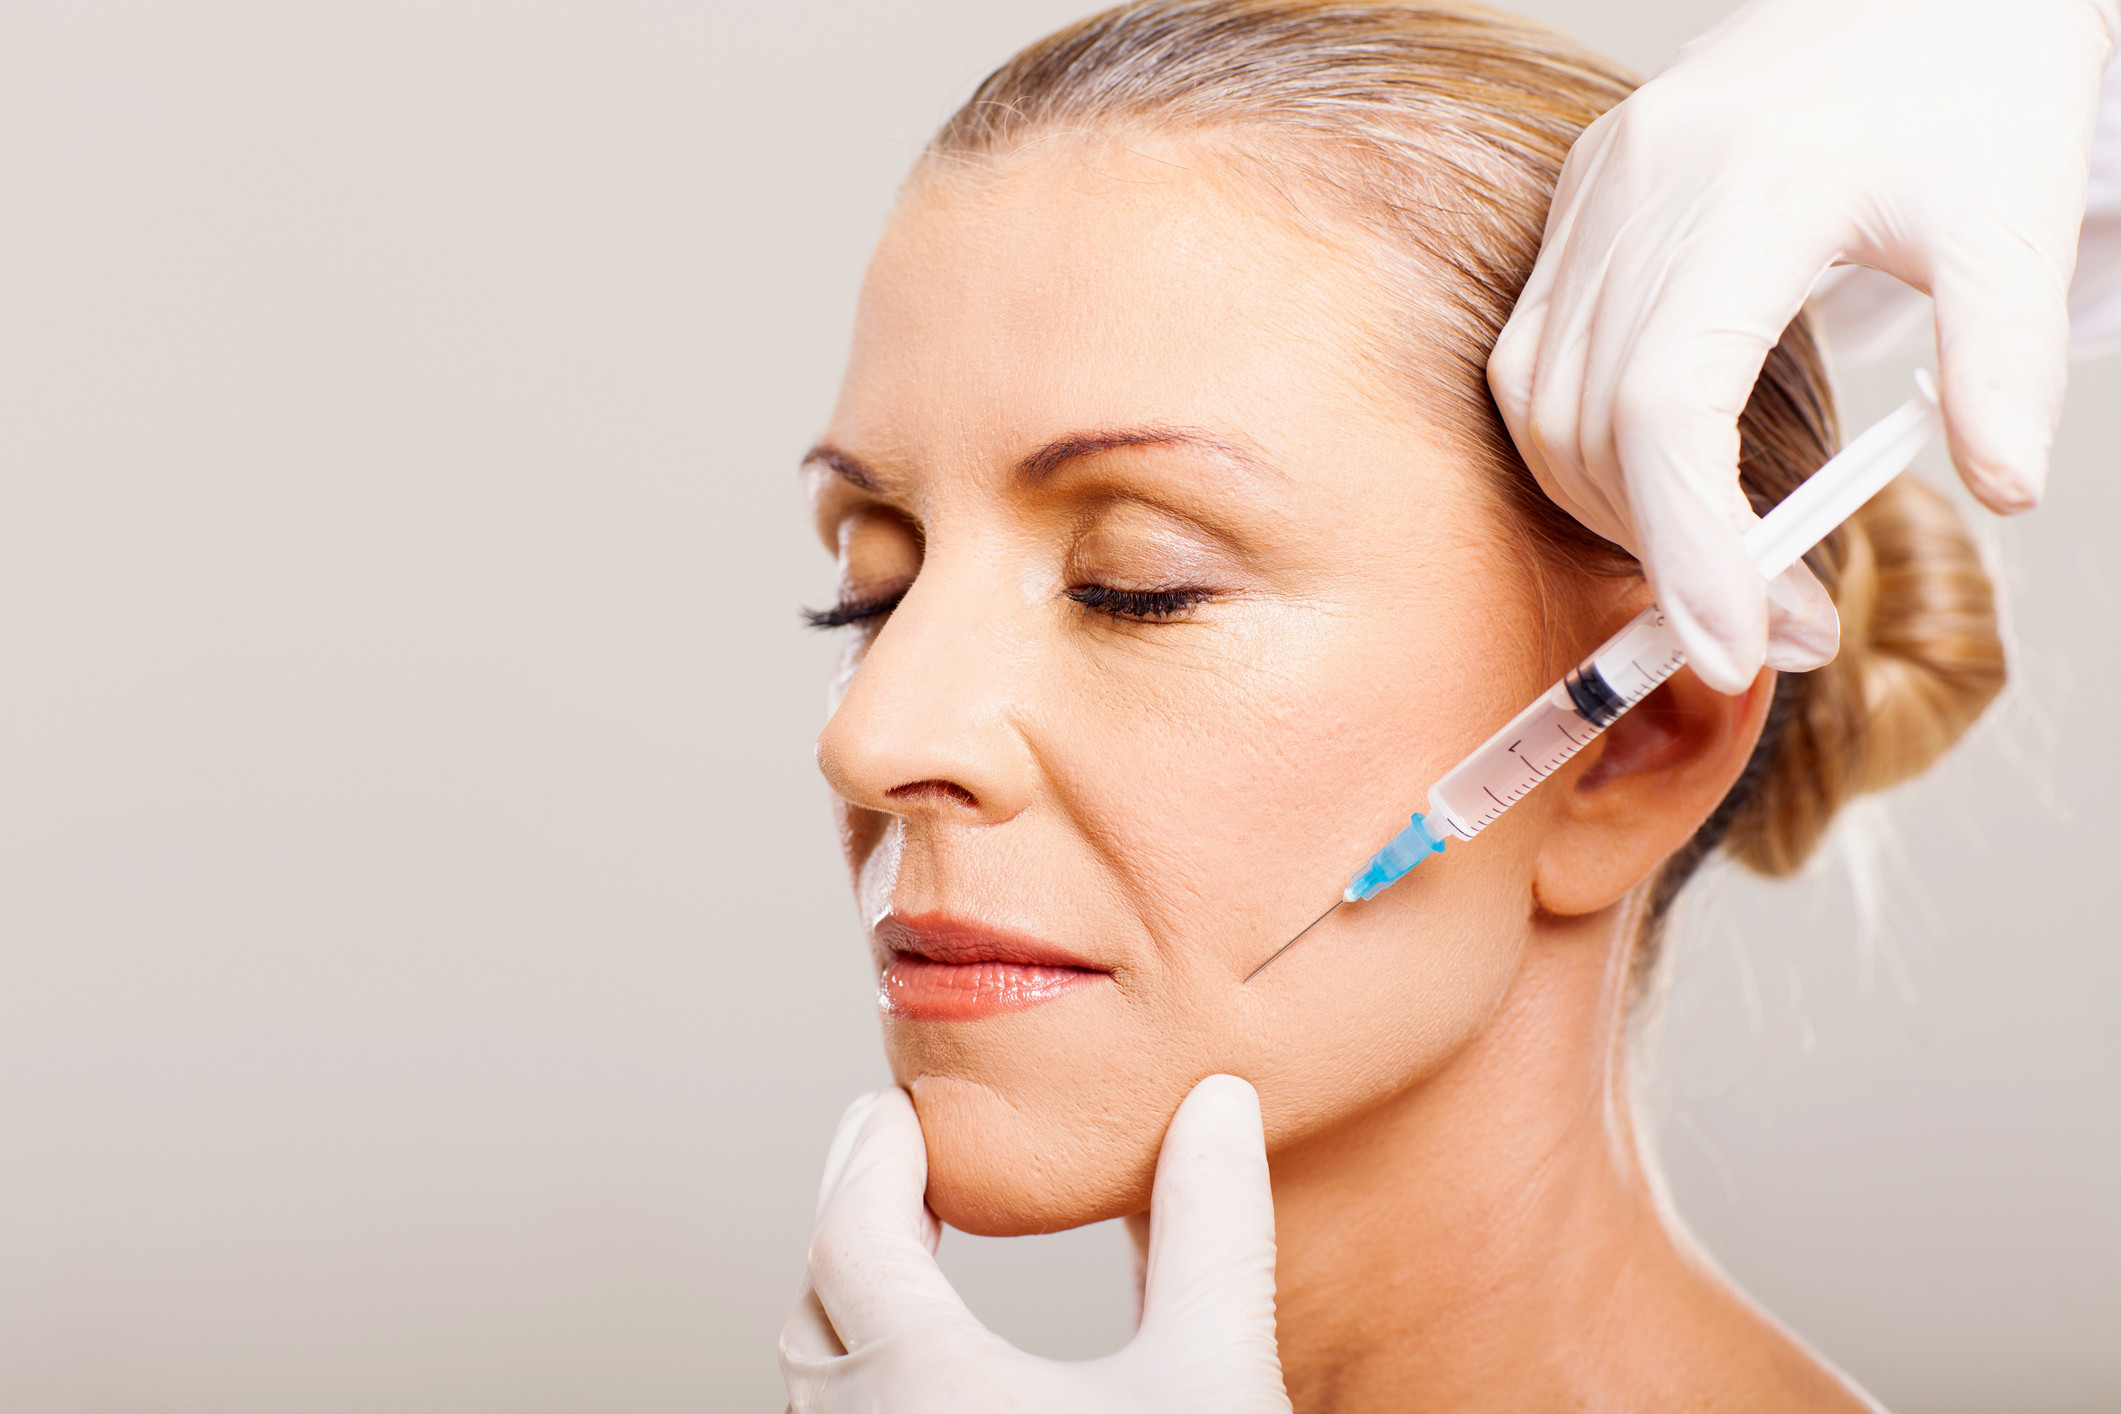 An image of a senior woman getting botox treatment to reduce wrinkles and fine lines.